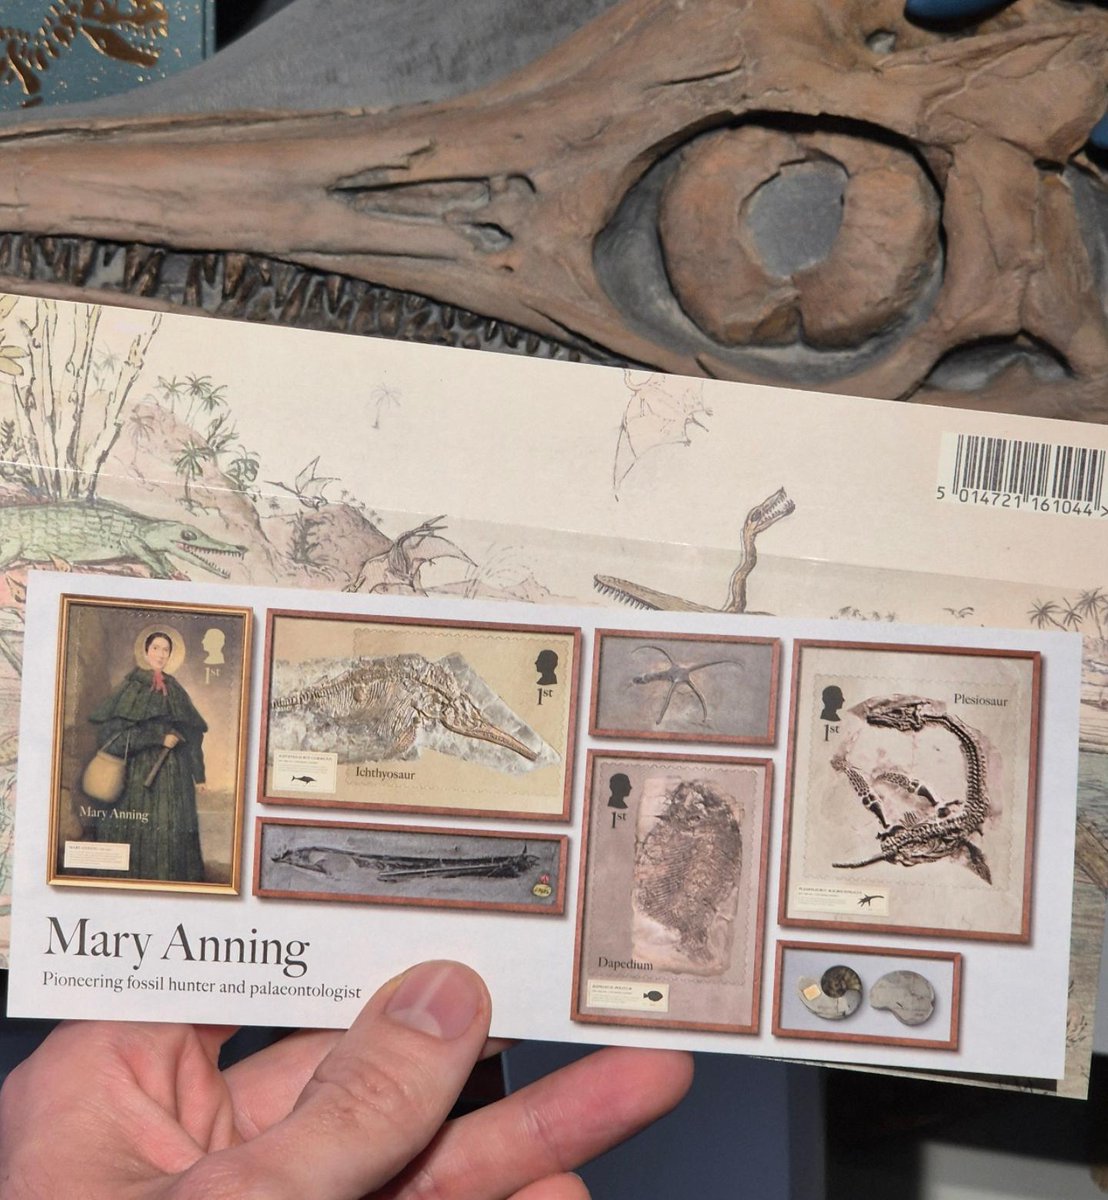 The Mary Anning stamp collection arrived. It looks fantastic! Wonderful to see several of her classic fossils covered. The ichthyosaur is not an I. communis, though. In fact, it's an Ichthyosaurus anningae that was actually *found* by Mary! So, Anning found and anningae. 1/2.